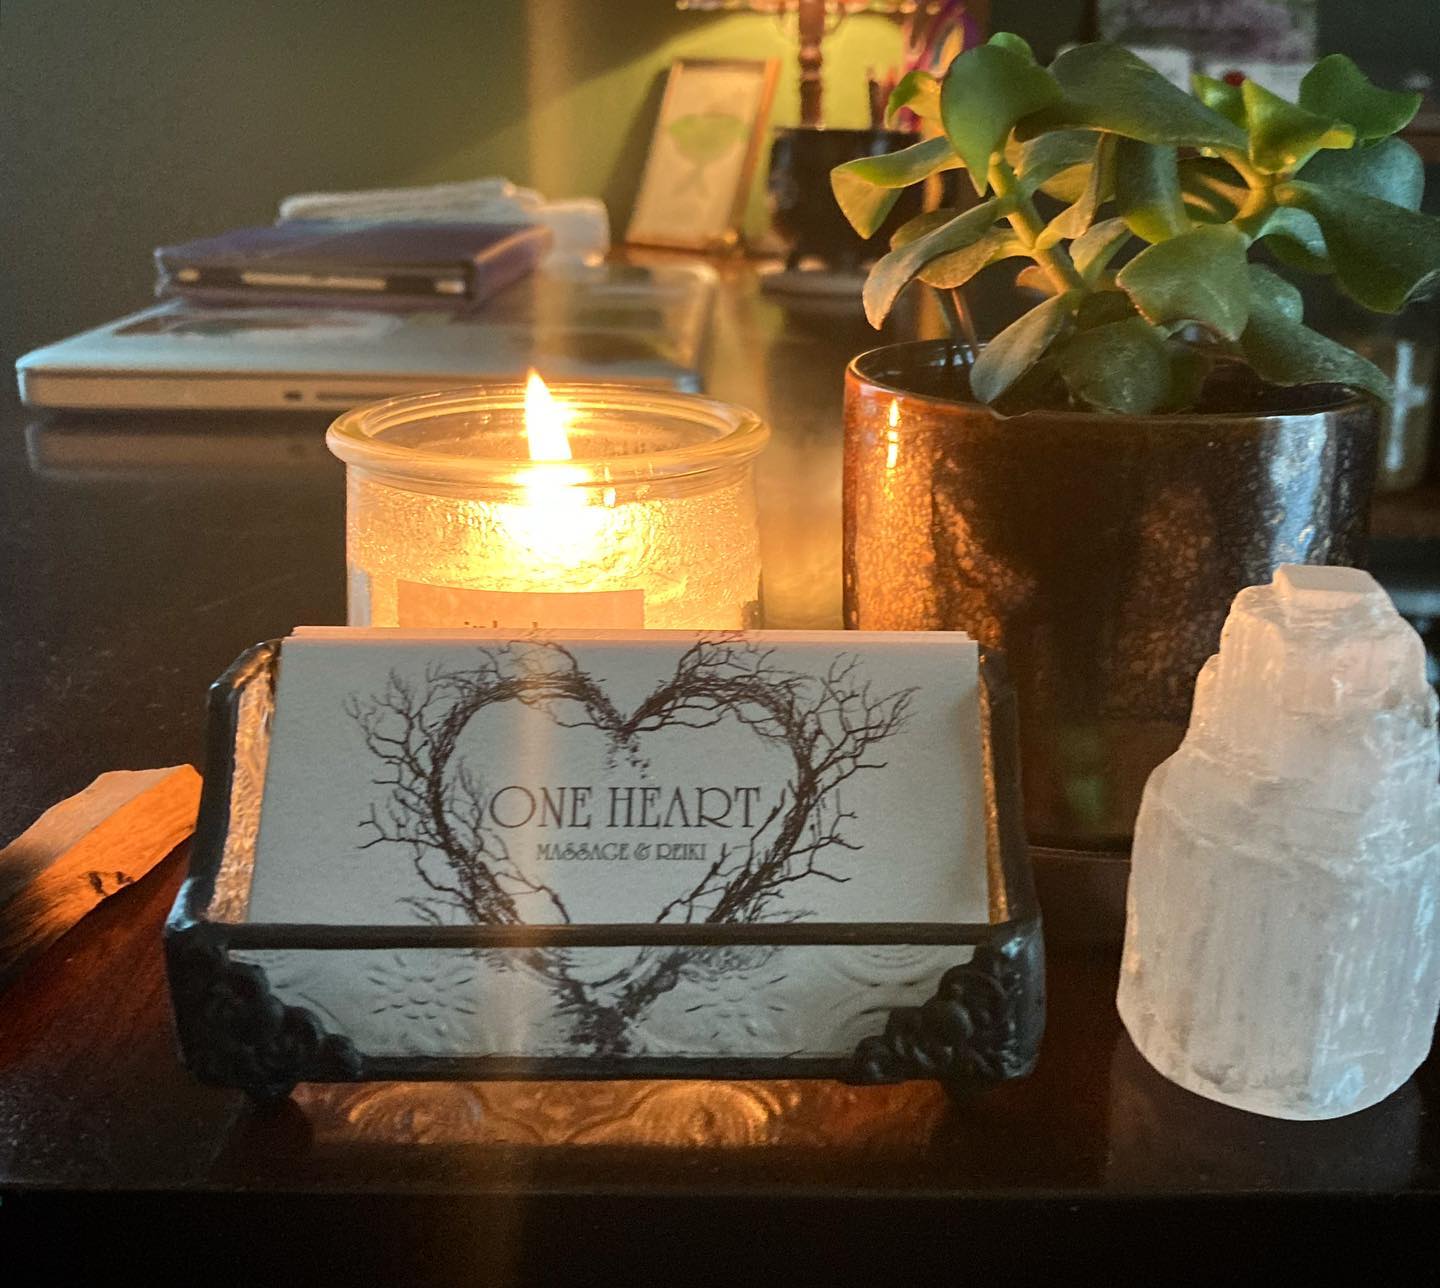 Business Cards & Candle from One Heart Massage